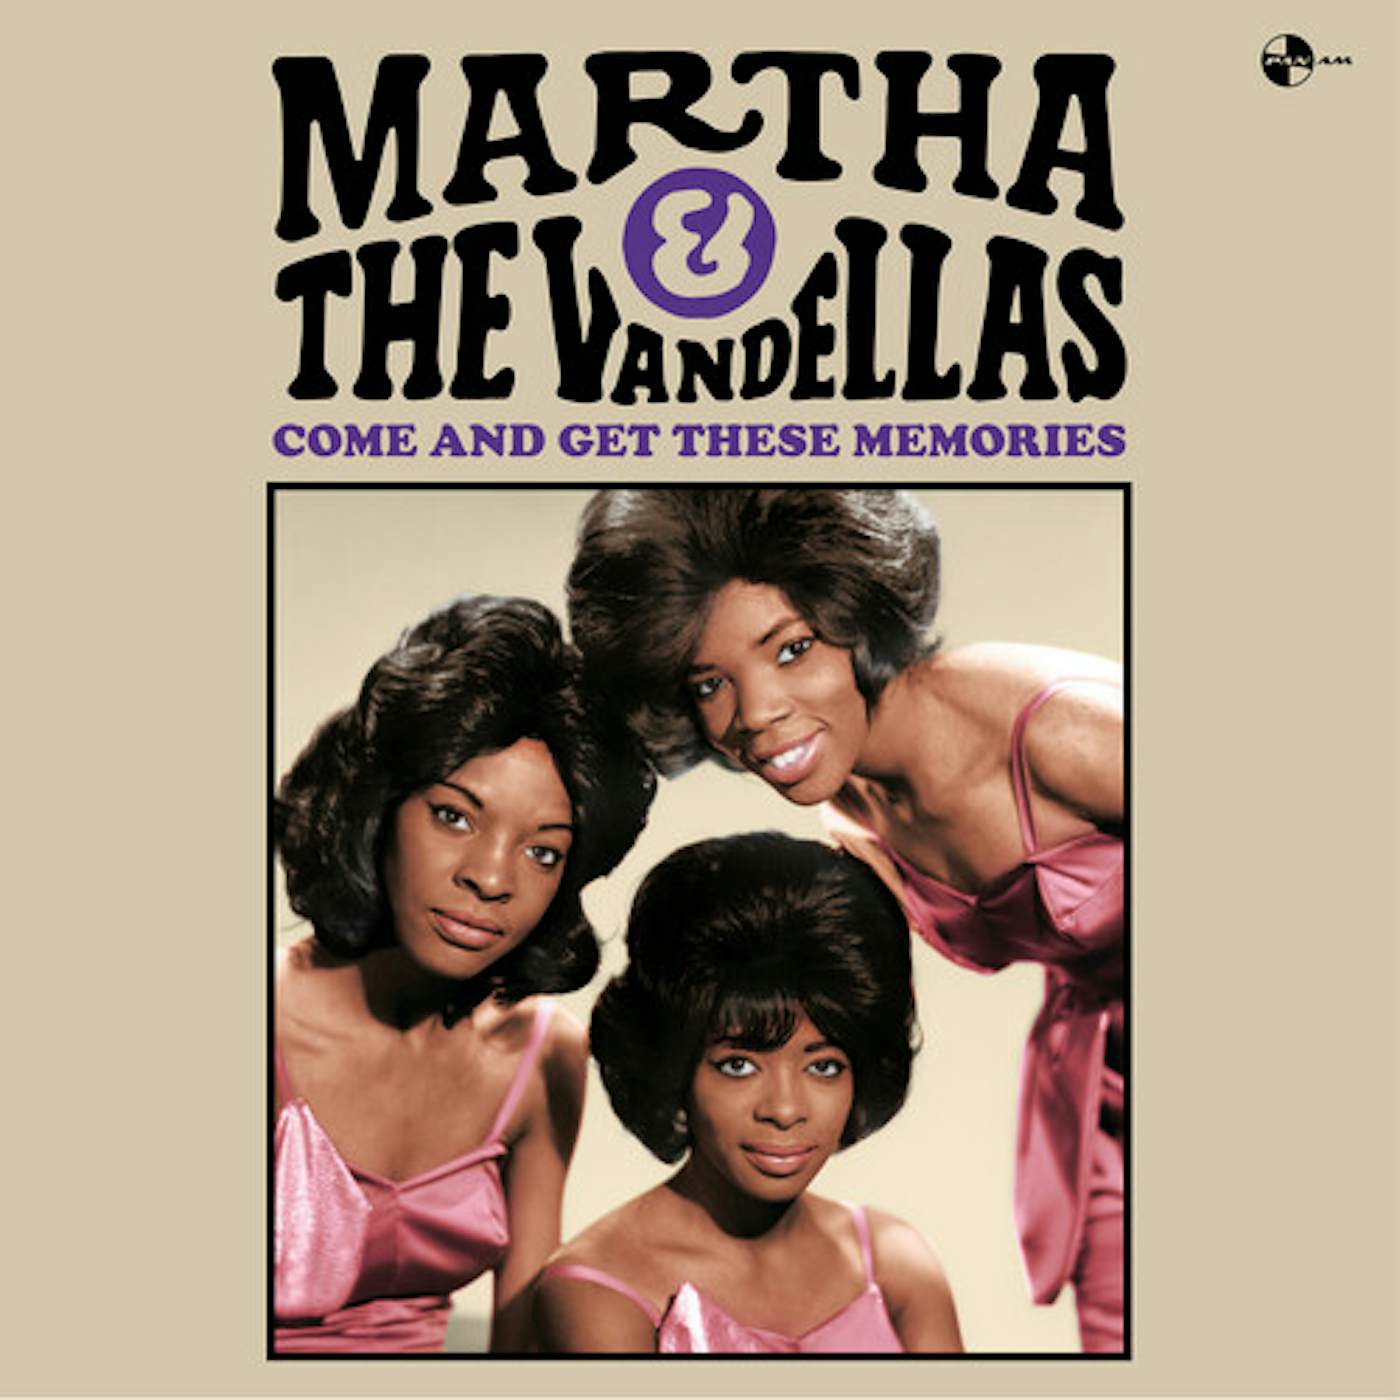 Martha & The Vandellas  Come And Get These Memories Vinyl Record